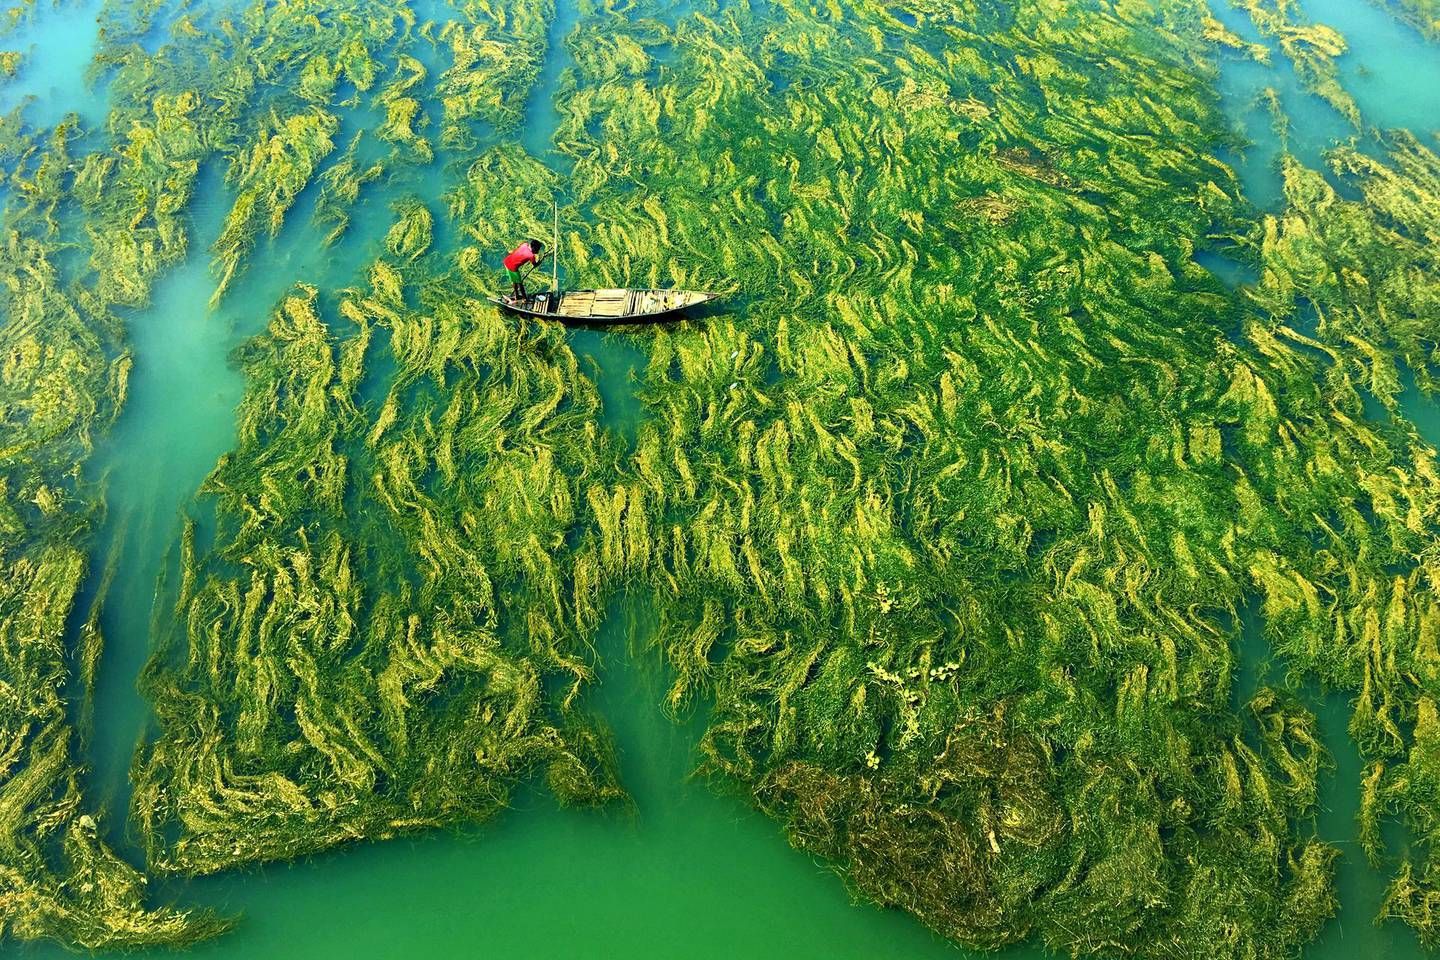 'A Journey Outside Our World' by Apratim Pal. A fisherman makes his way above moss-like structures that cause water pollution in India.  Apratim Pal